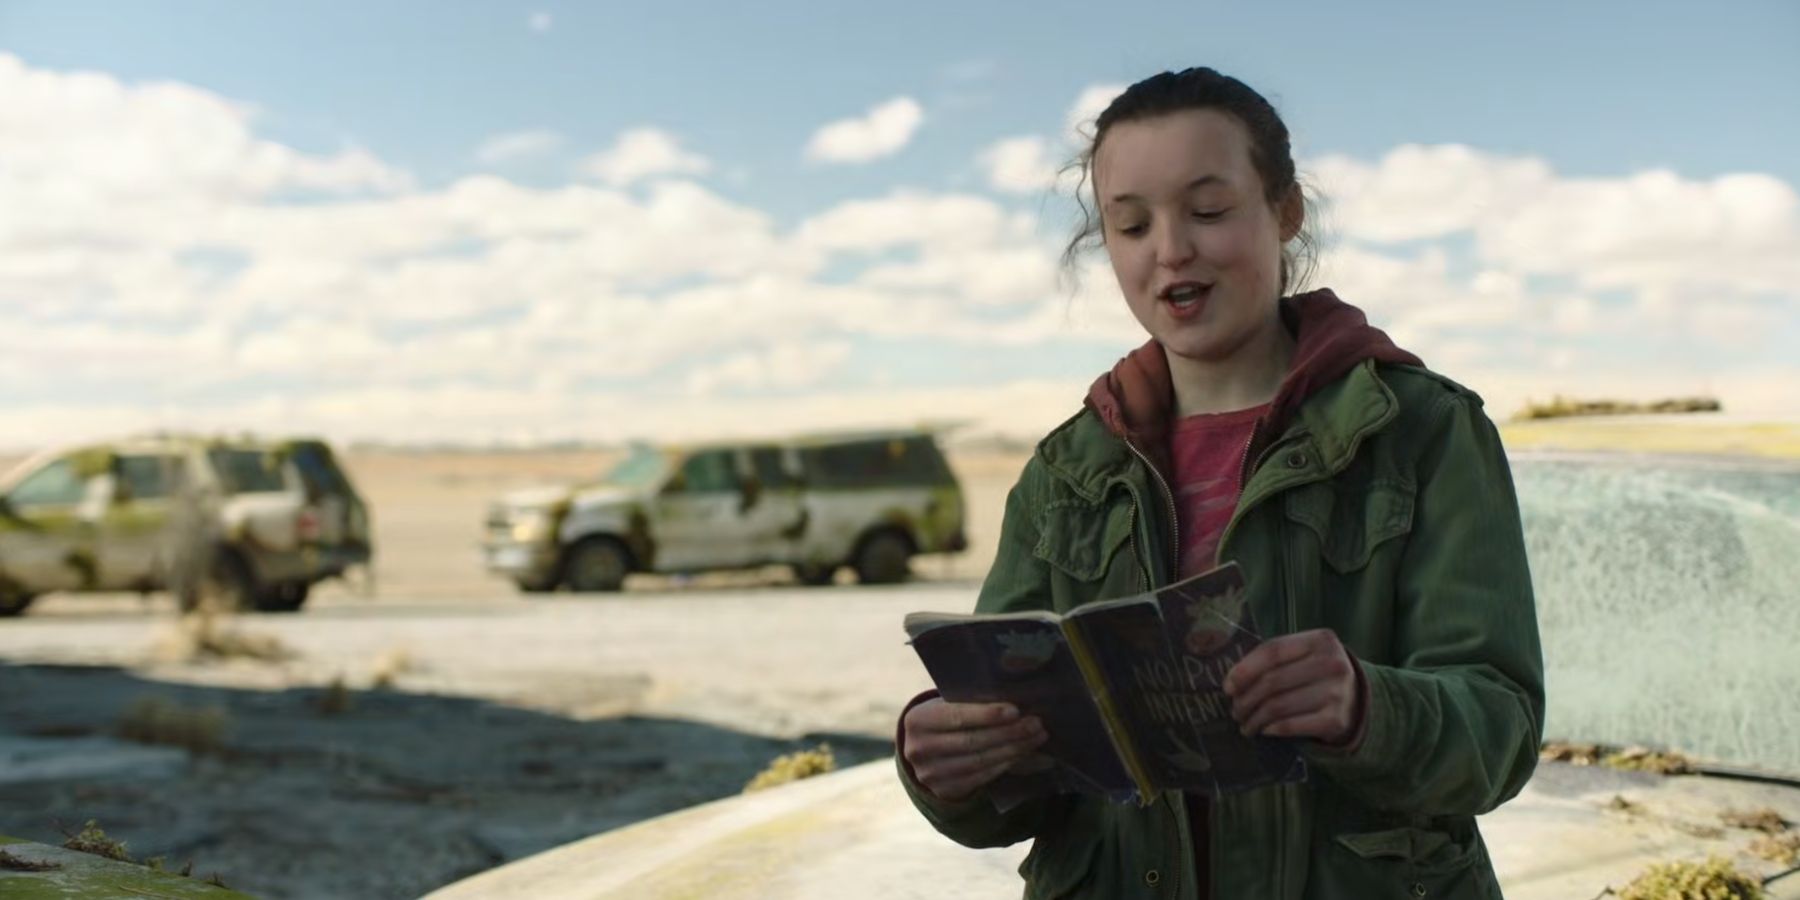 Ellie reading from her joke book in The Last of Us.